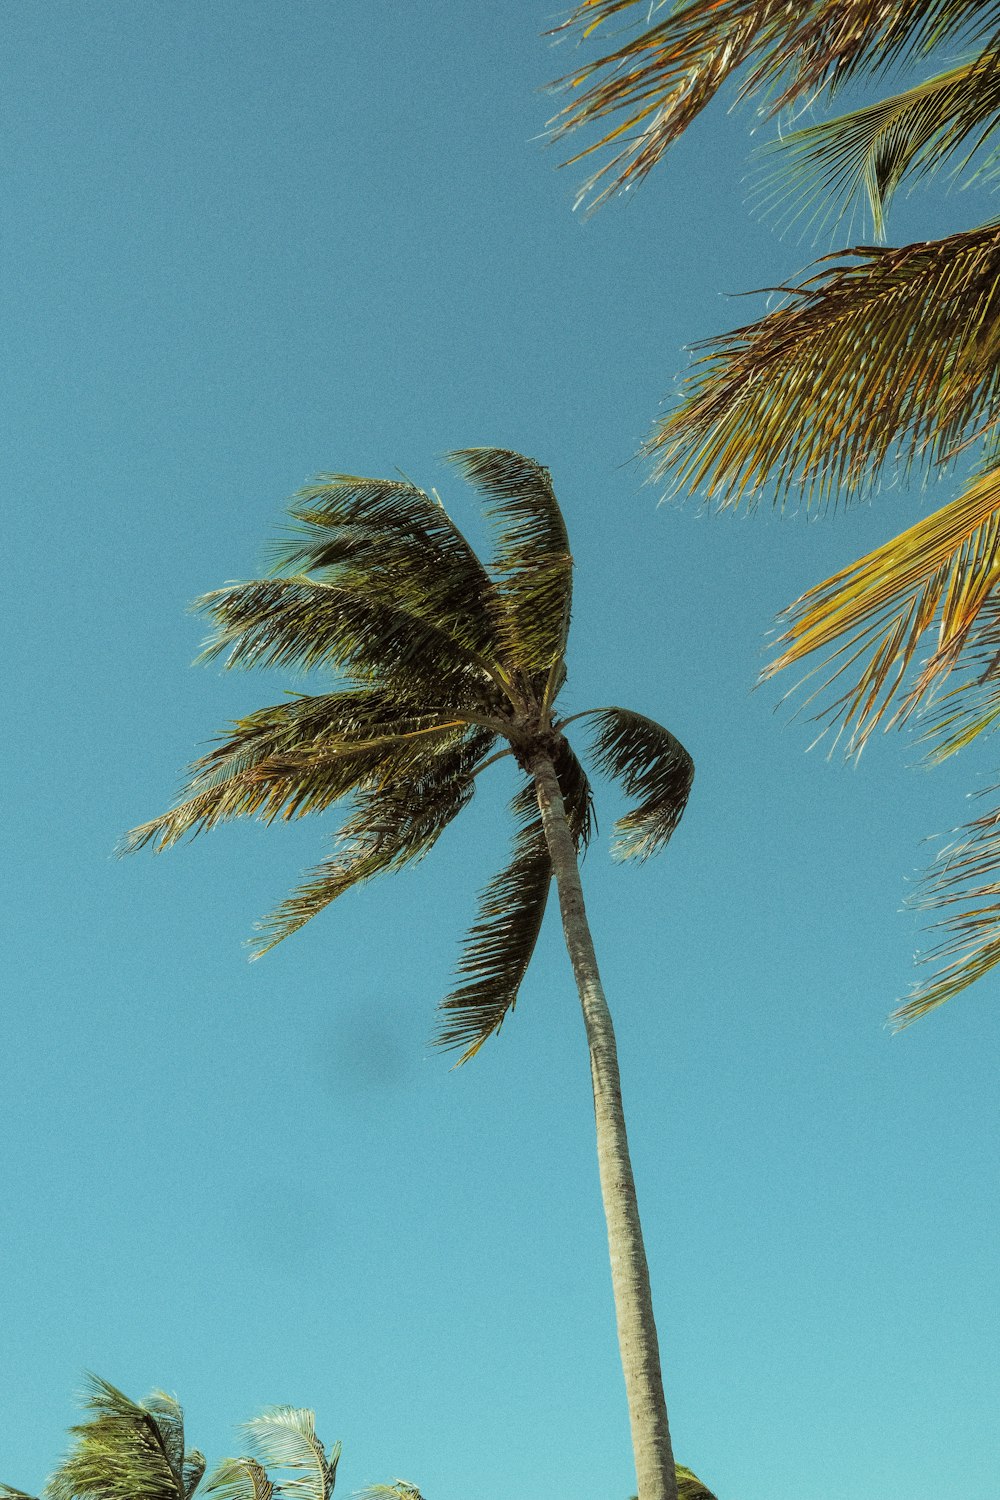 a palm tree blowing in the wind on a sunny day